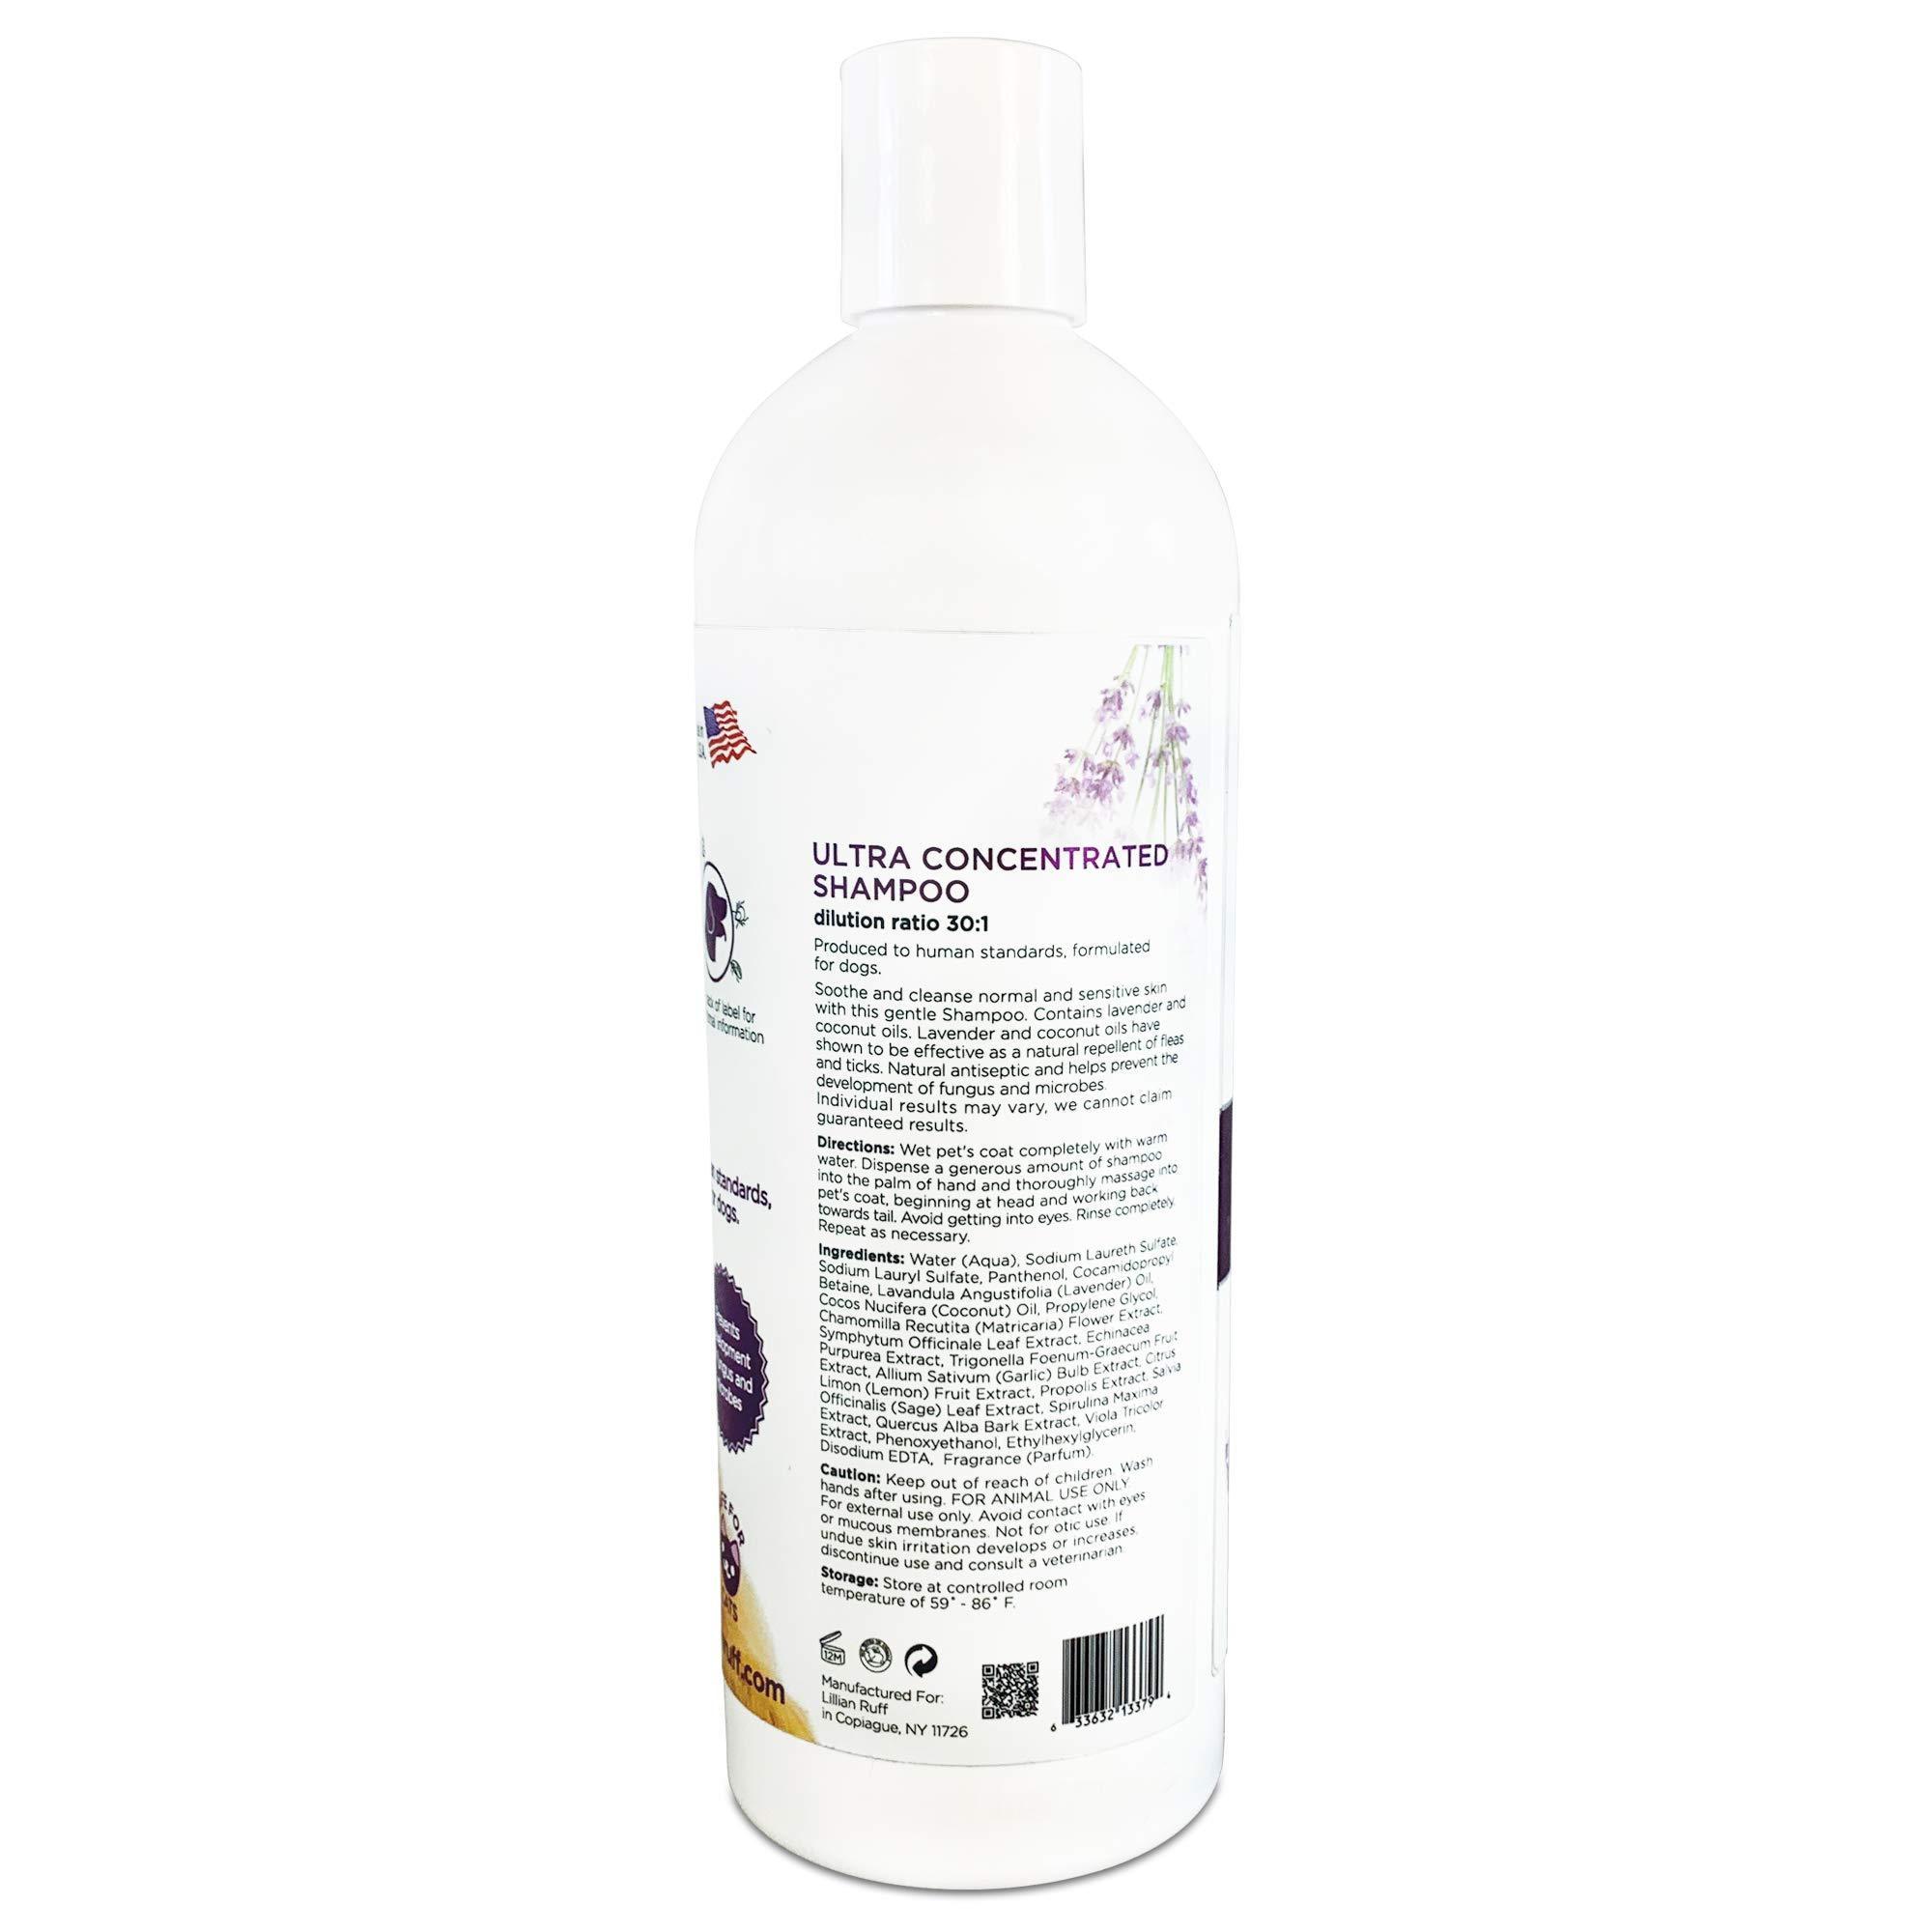 Ultra Concentrated Shampoo - Lillian Ruff-LR-ULTRACONCENTRATE16OZ-FBA